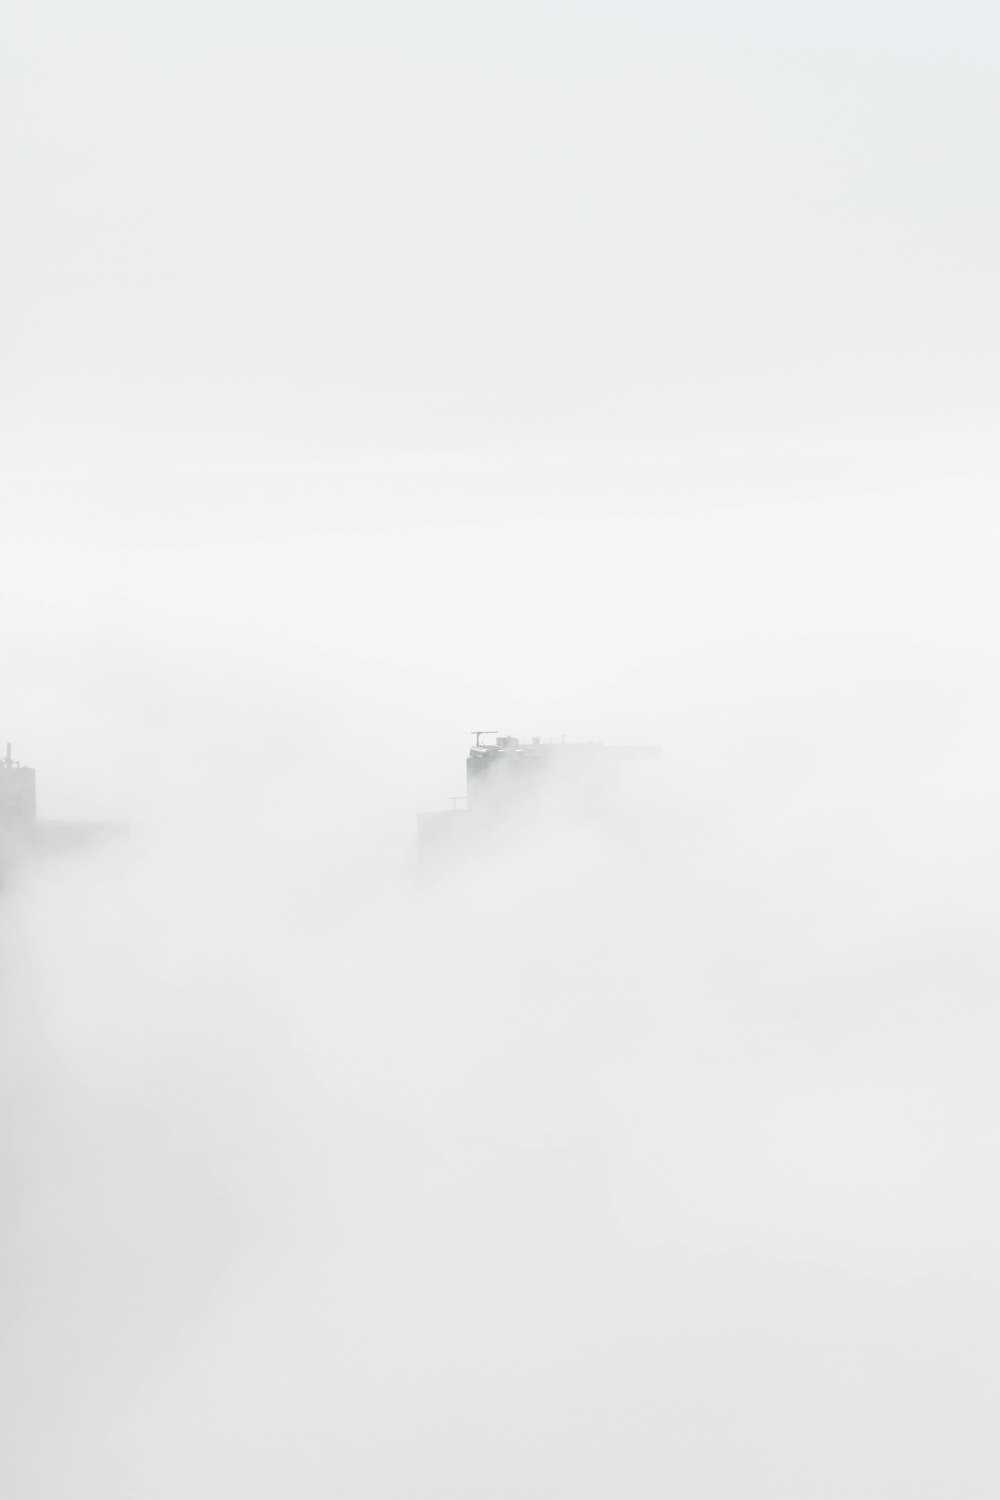 a foggy sky with a couple of boats in the water